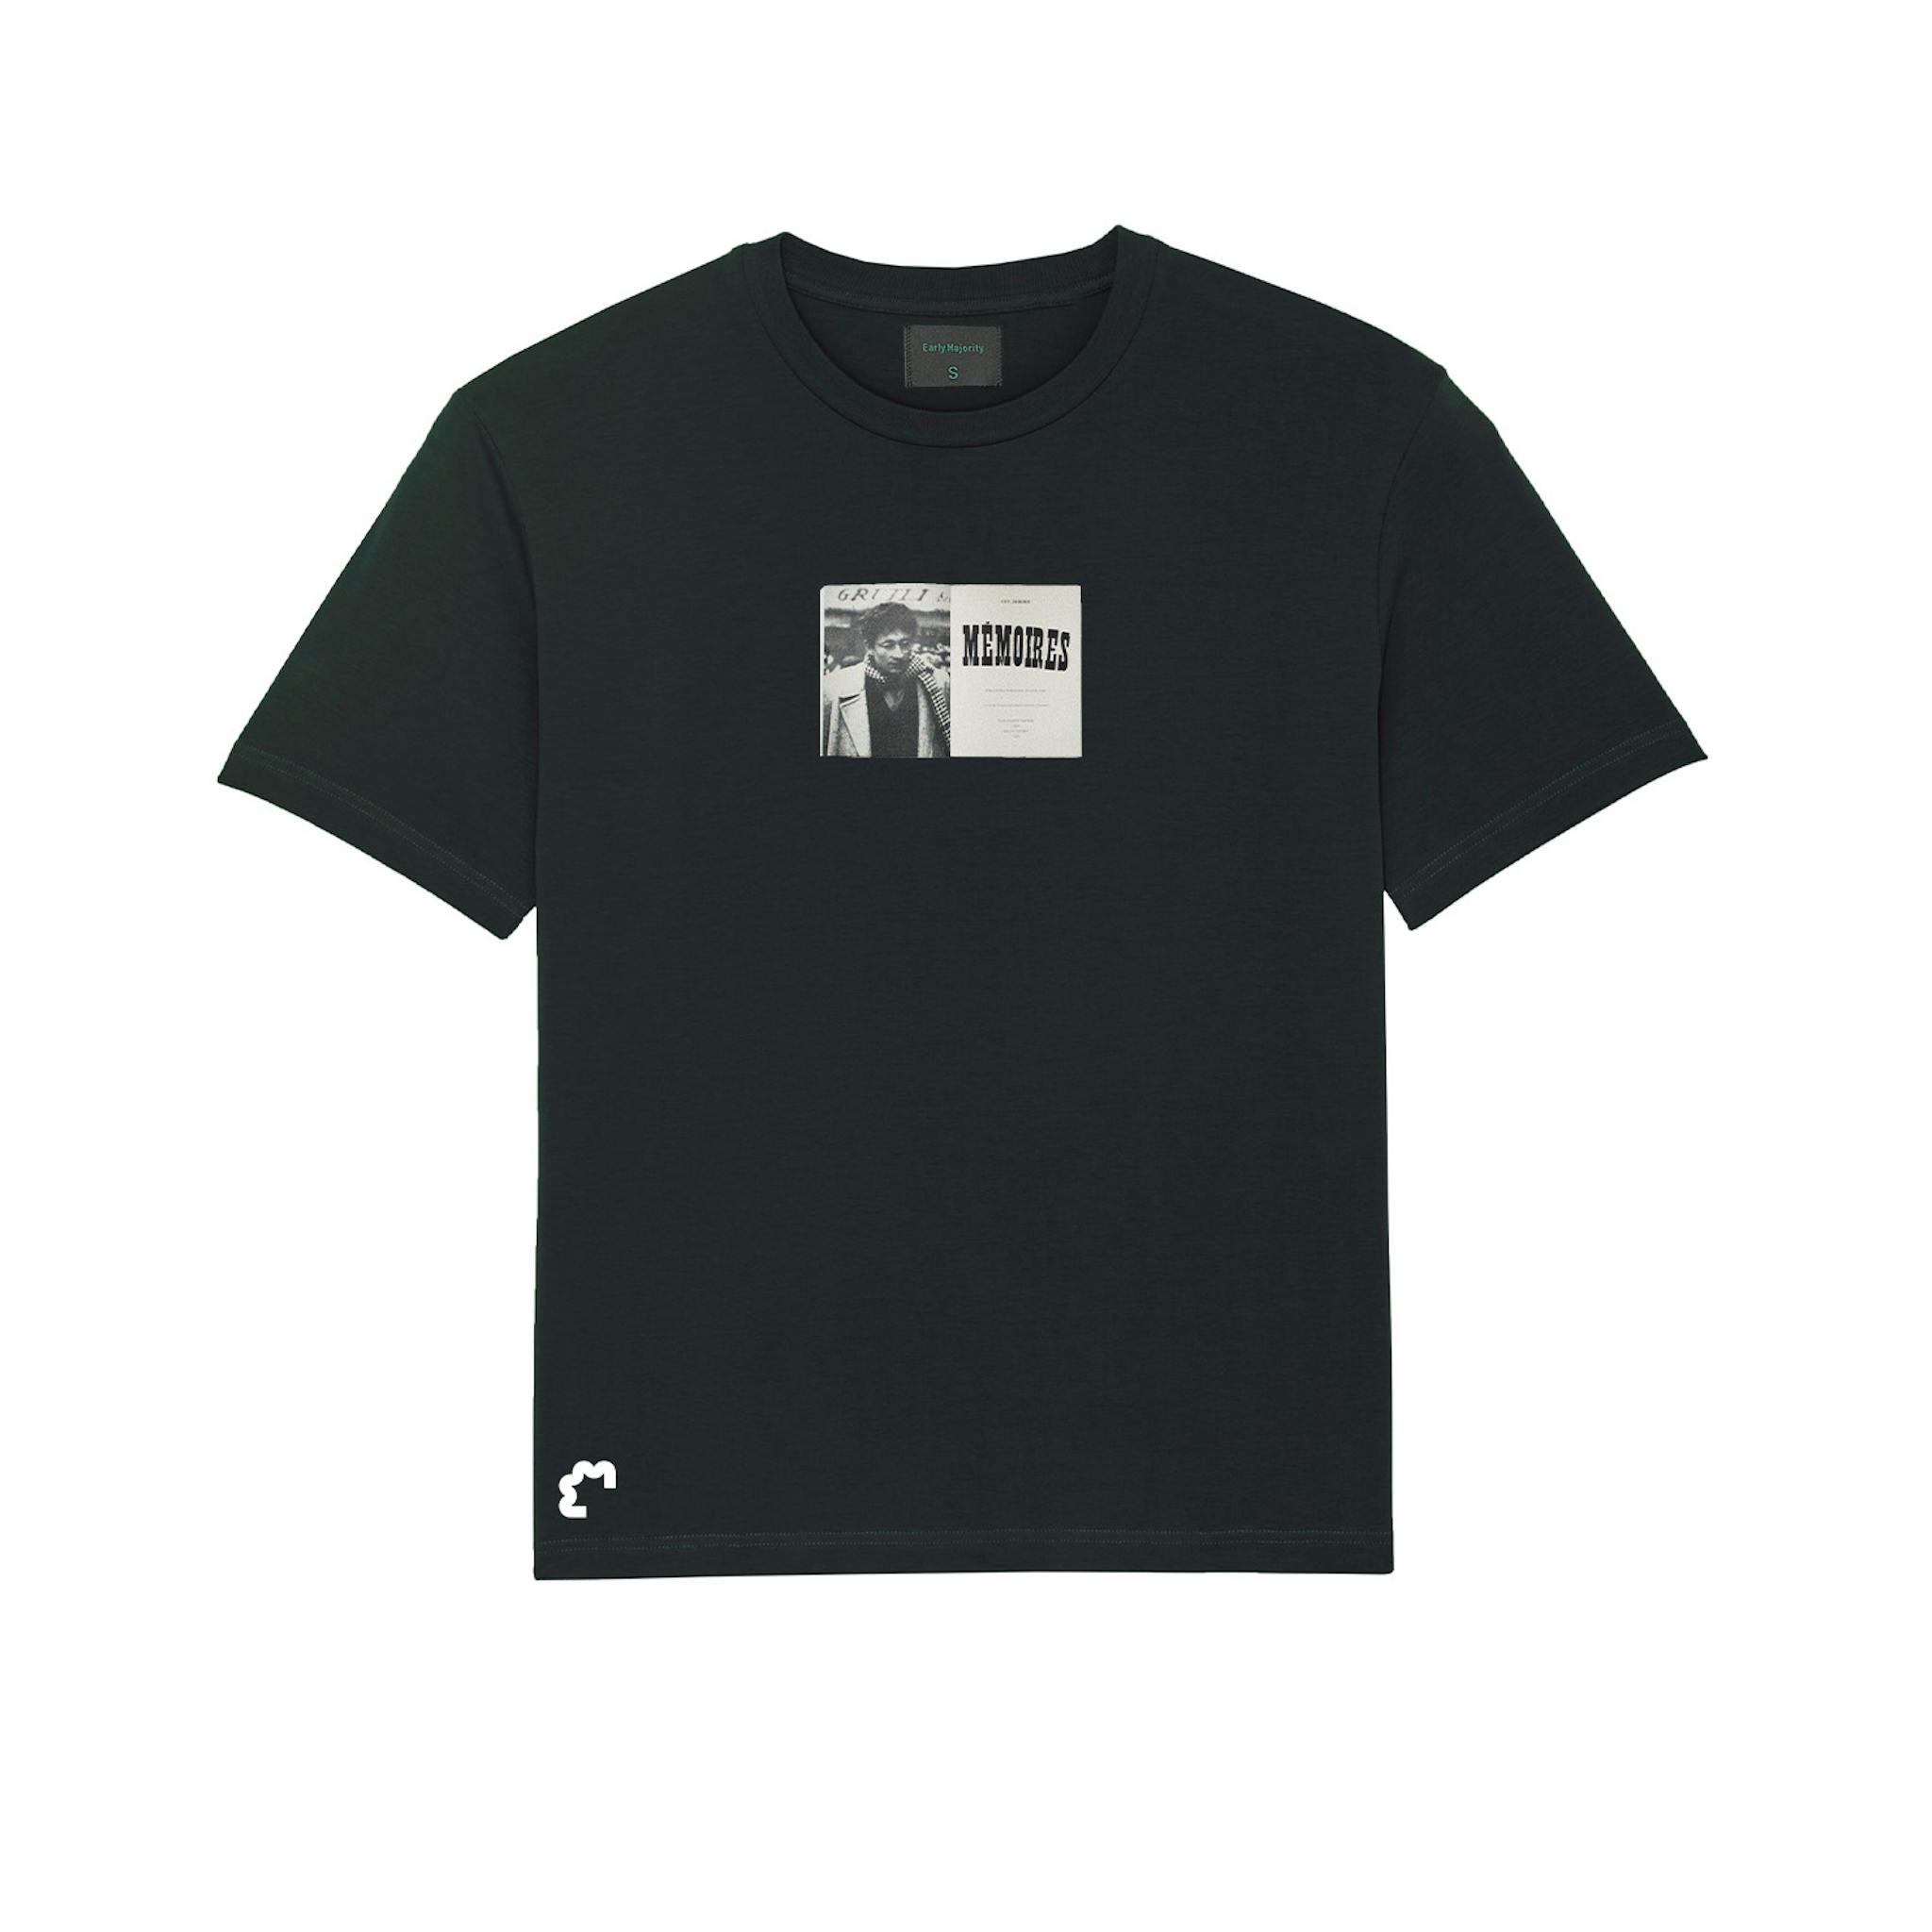 A black T-shirt with a square graphic and text on the front, and a small white emblem on the lower right side.